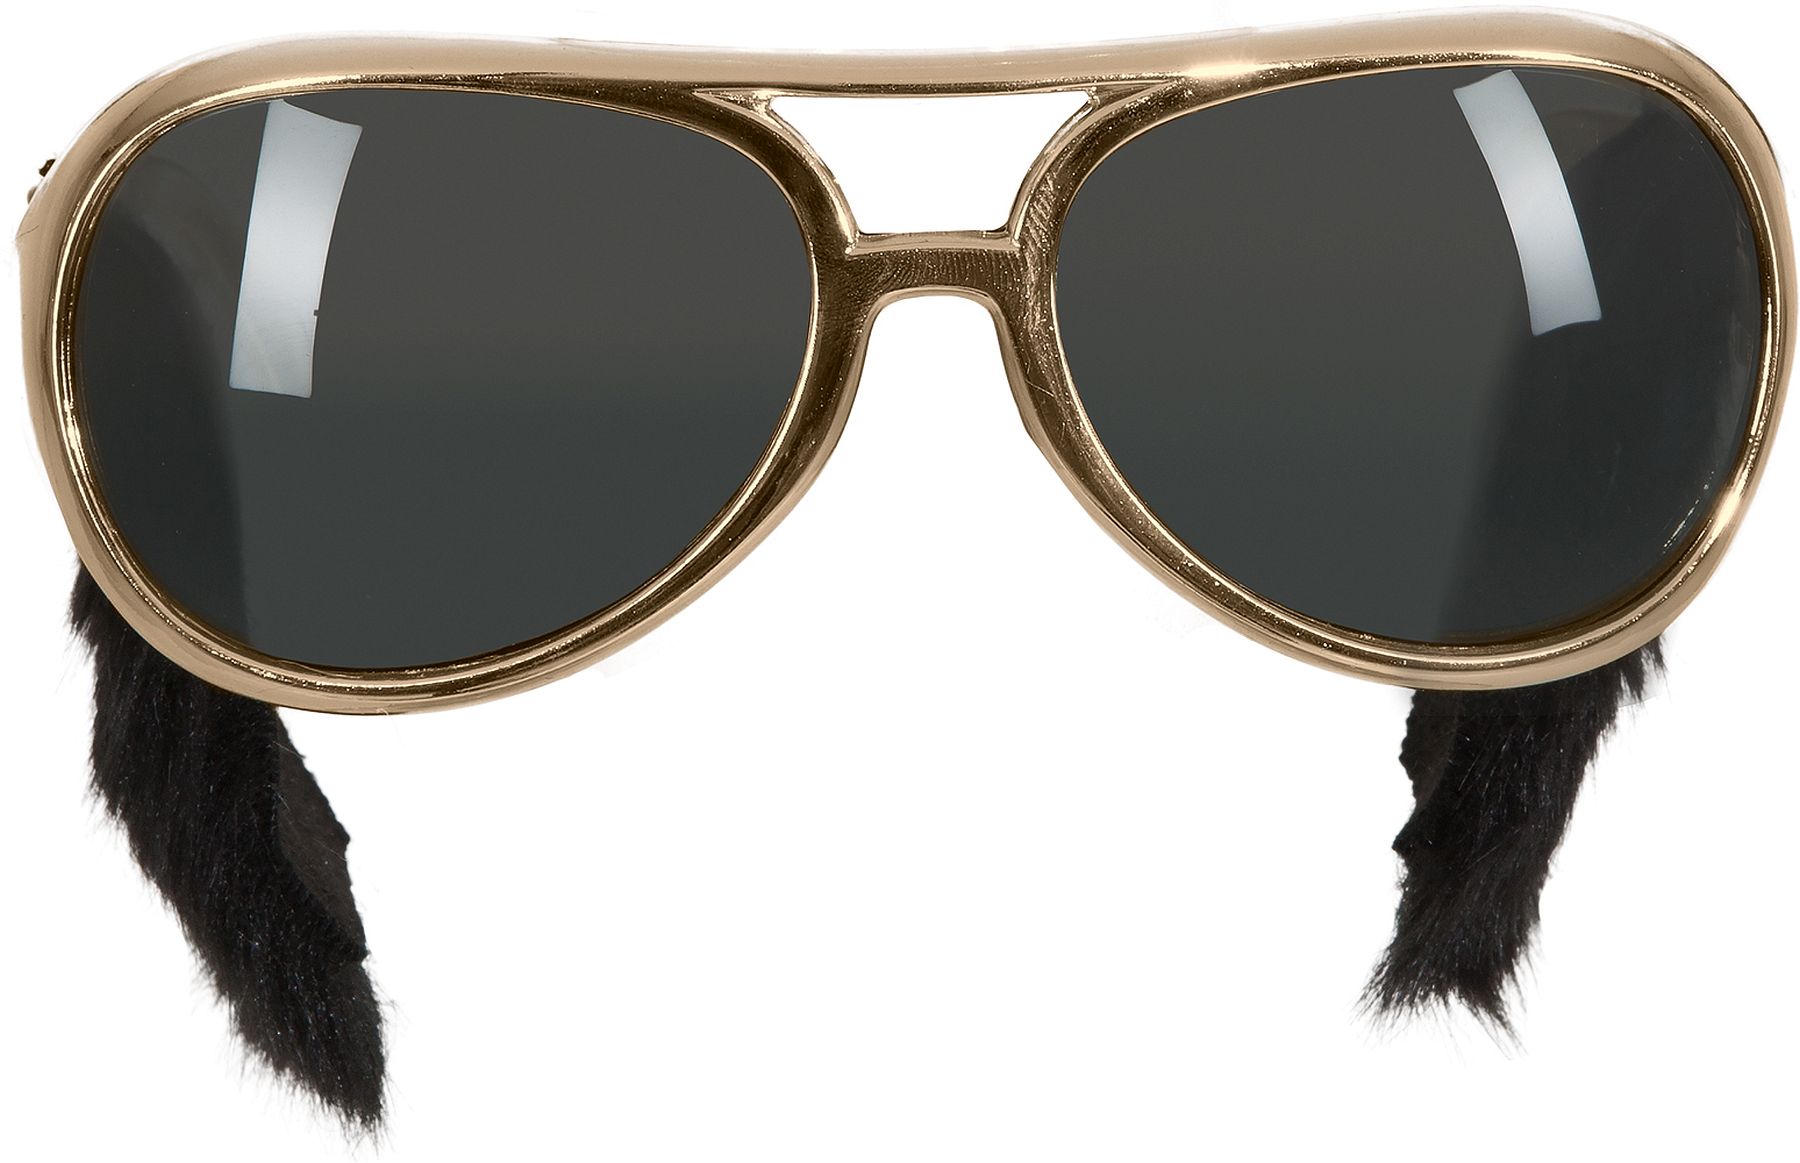 Rock'n roll glasses with sideburns, gold